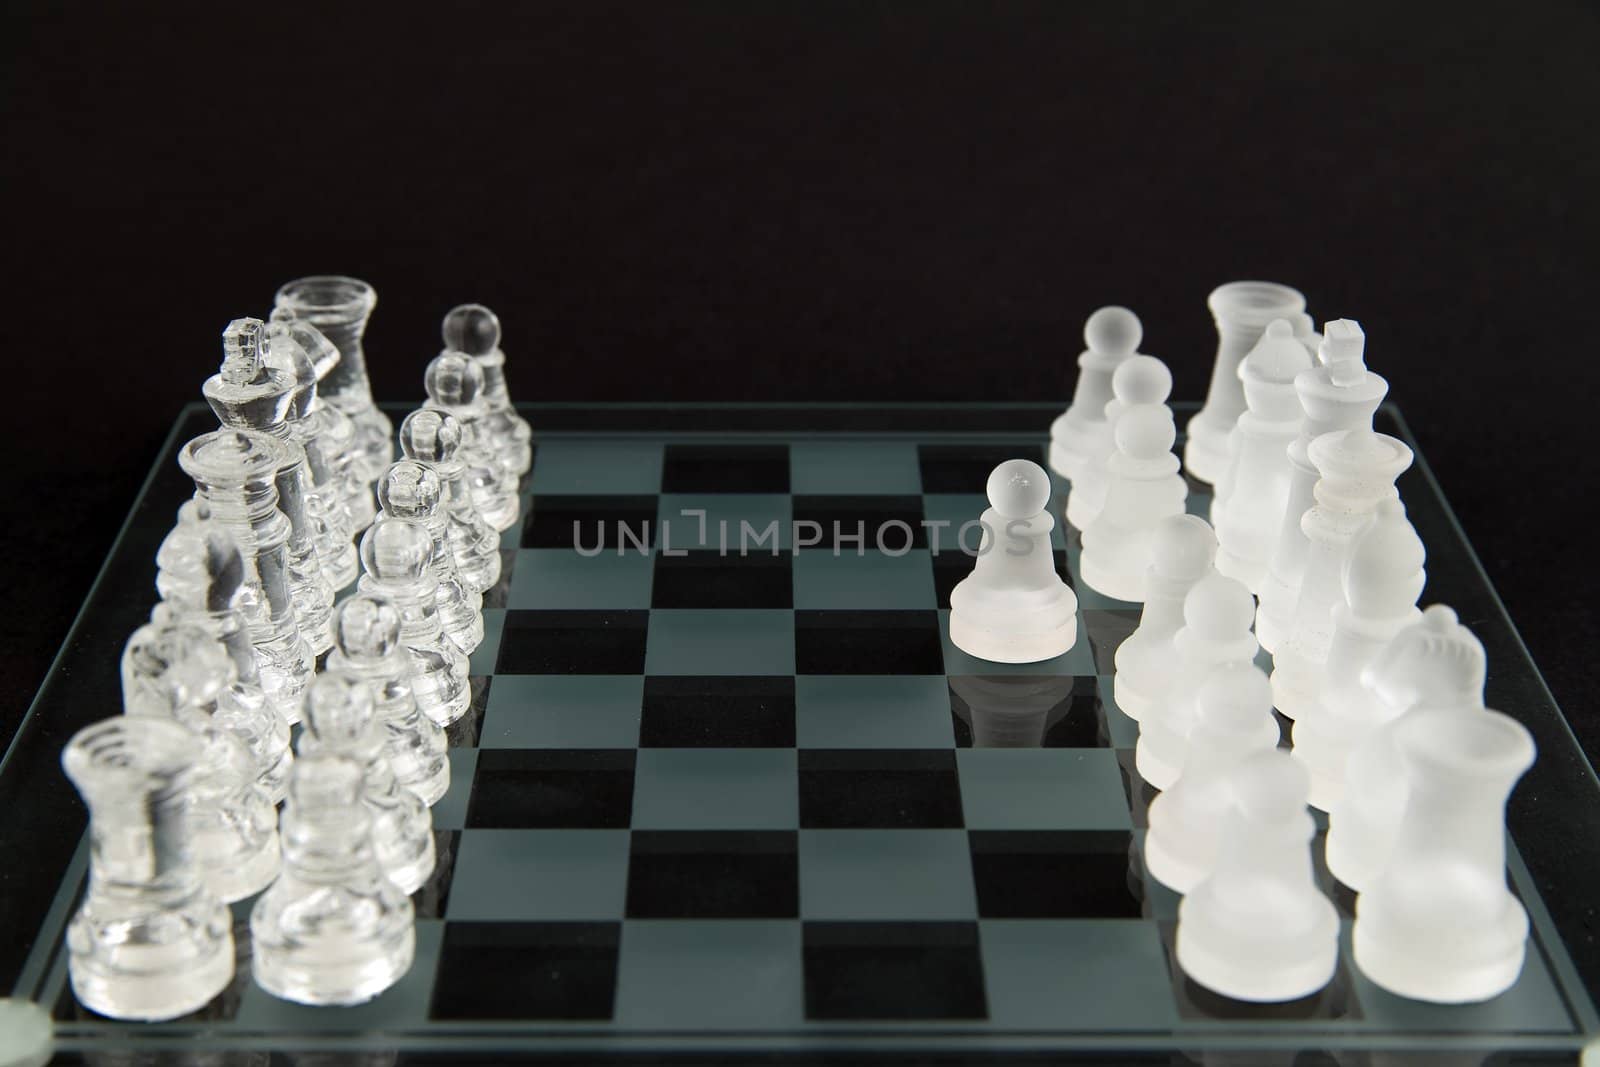 glass chess - let's play by furzyk73